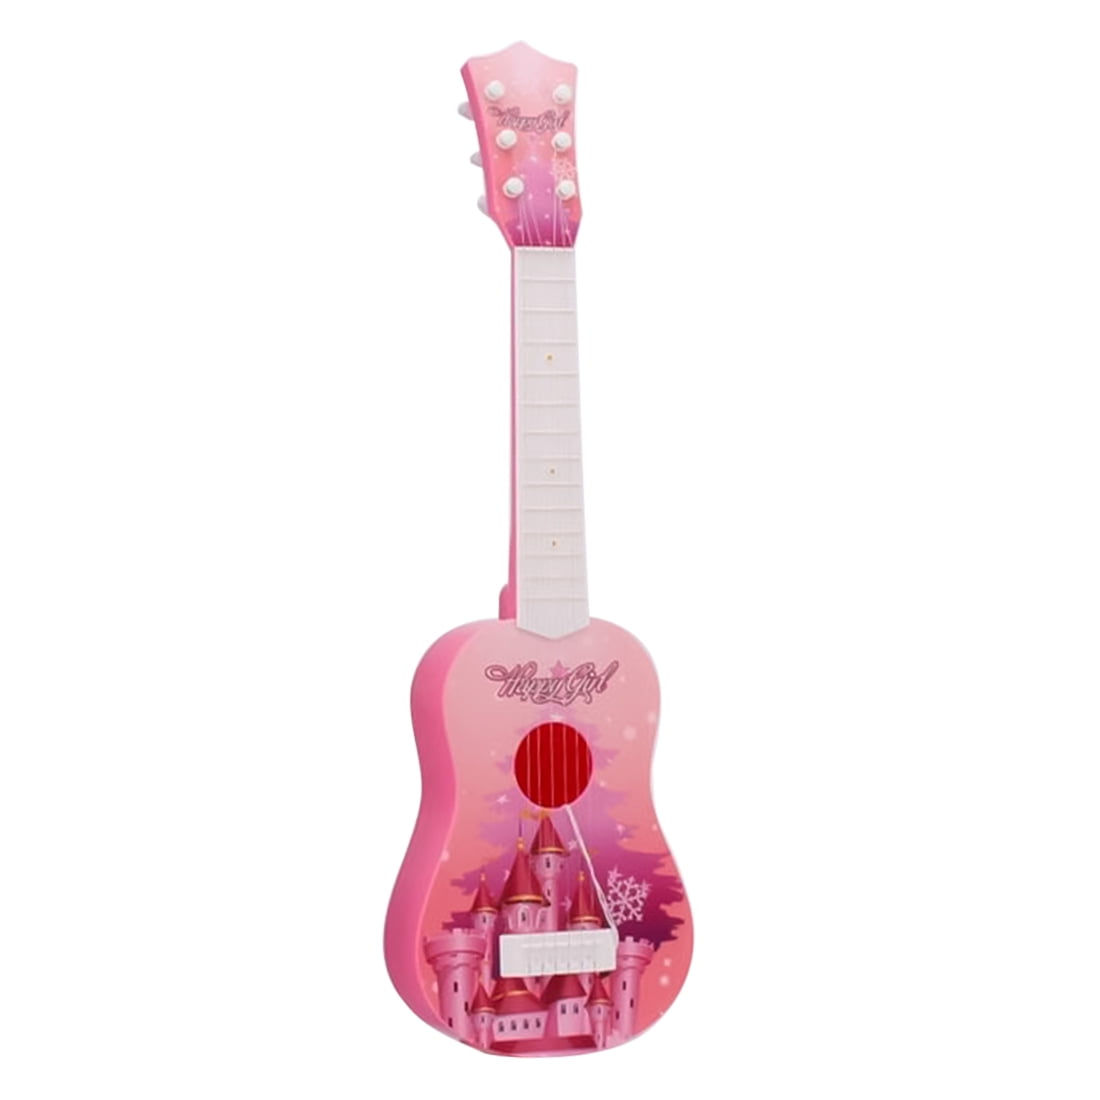 Plastic Guitar Music Instrument Toys Gift for - Pink - Walmart.com